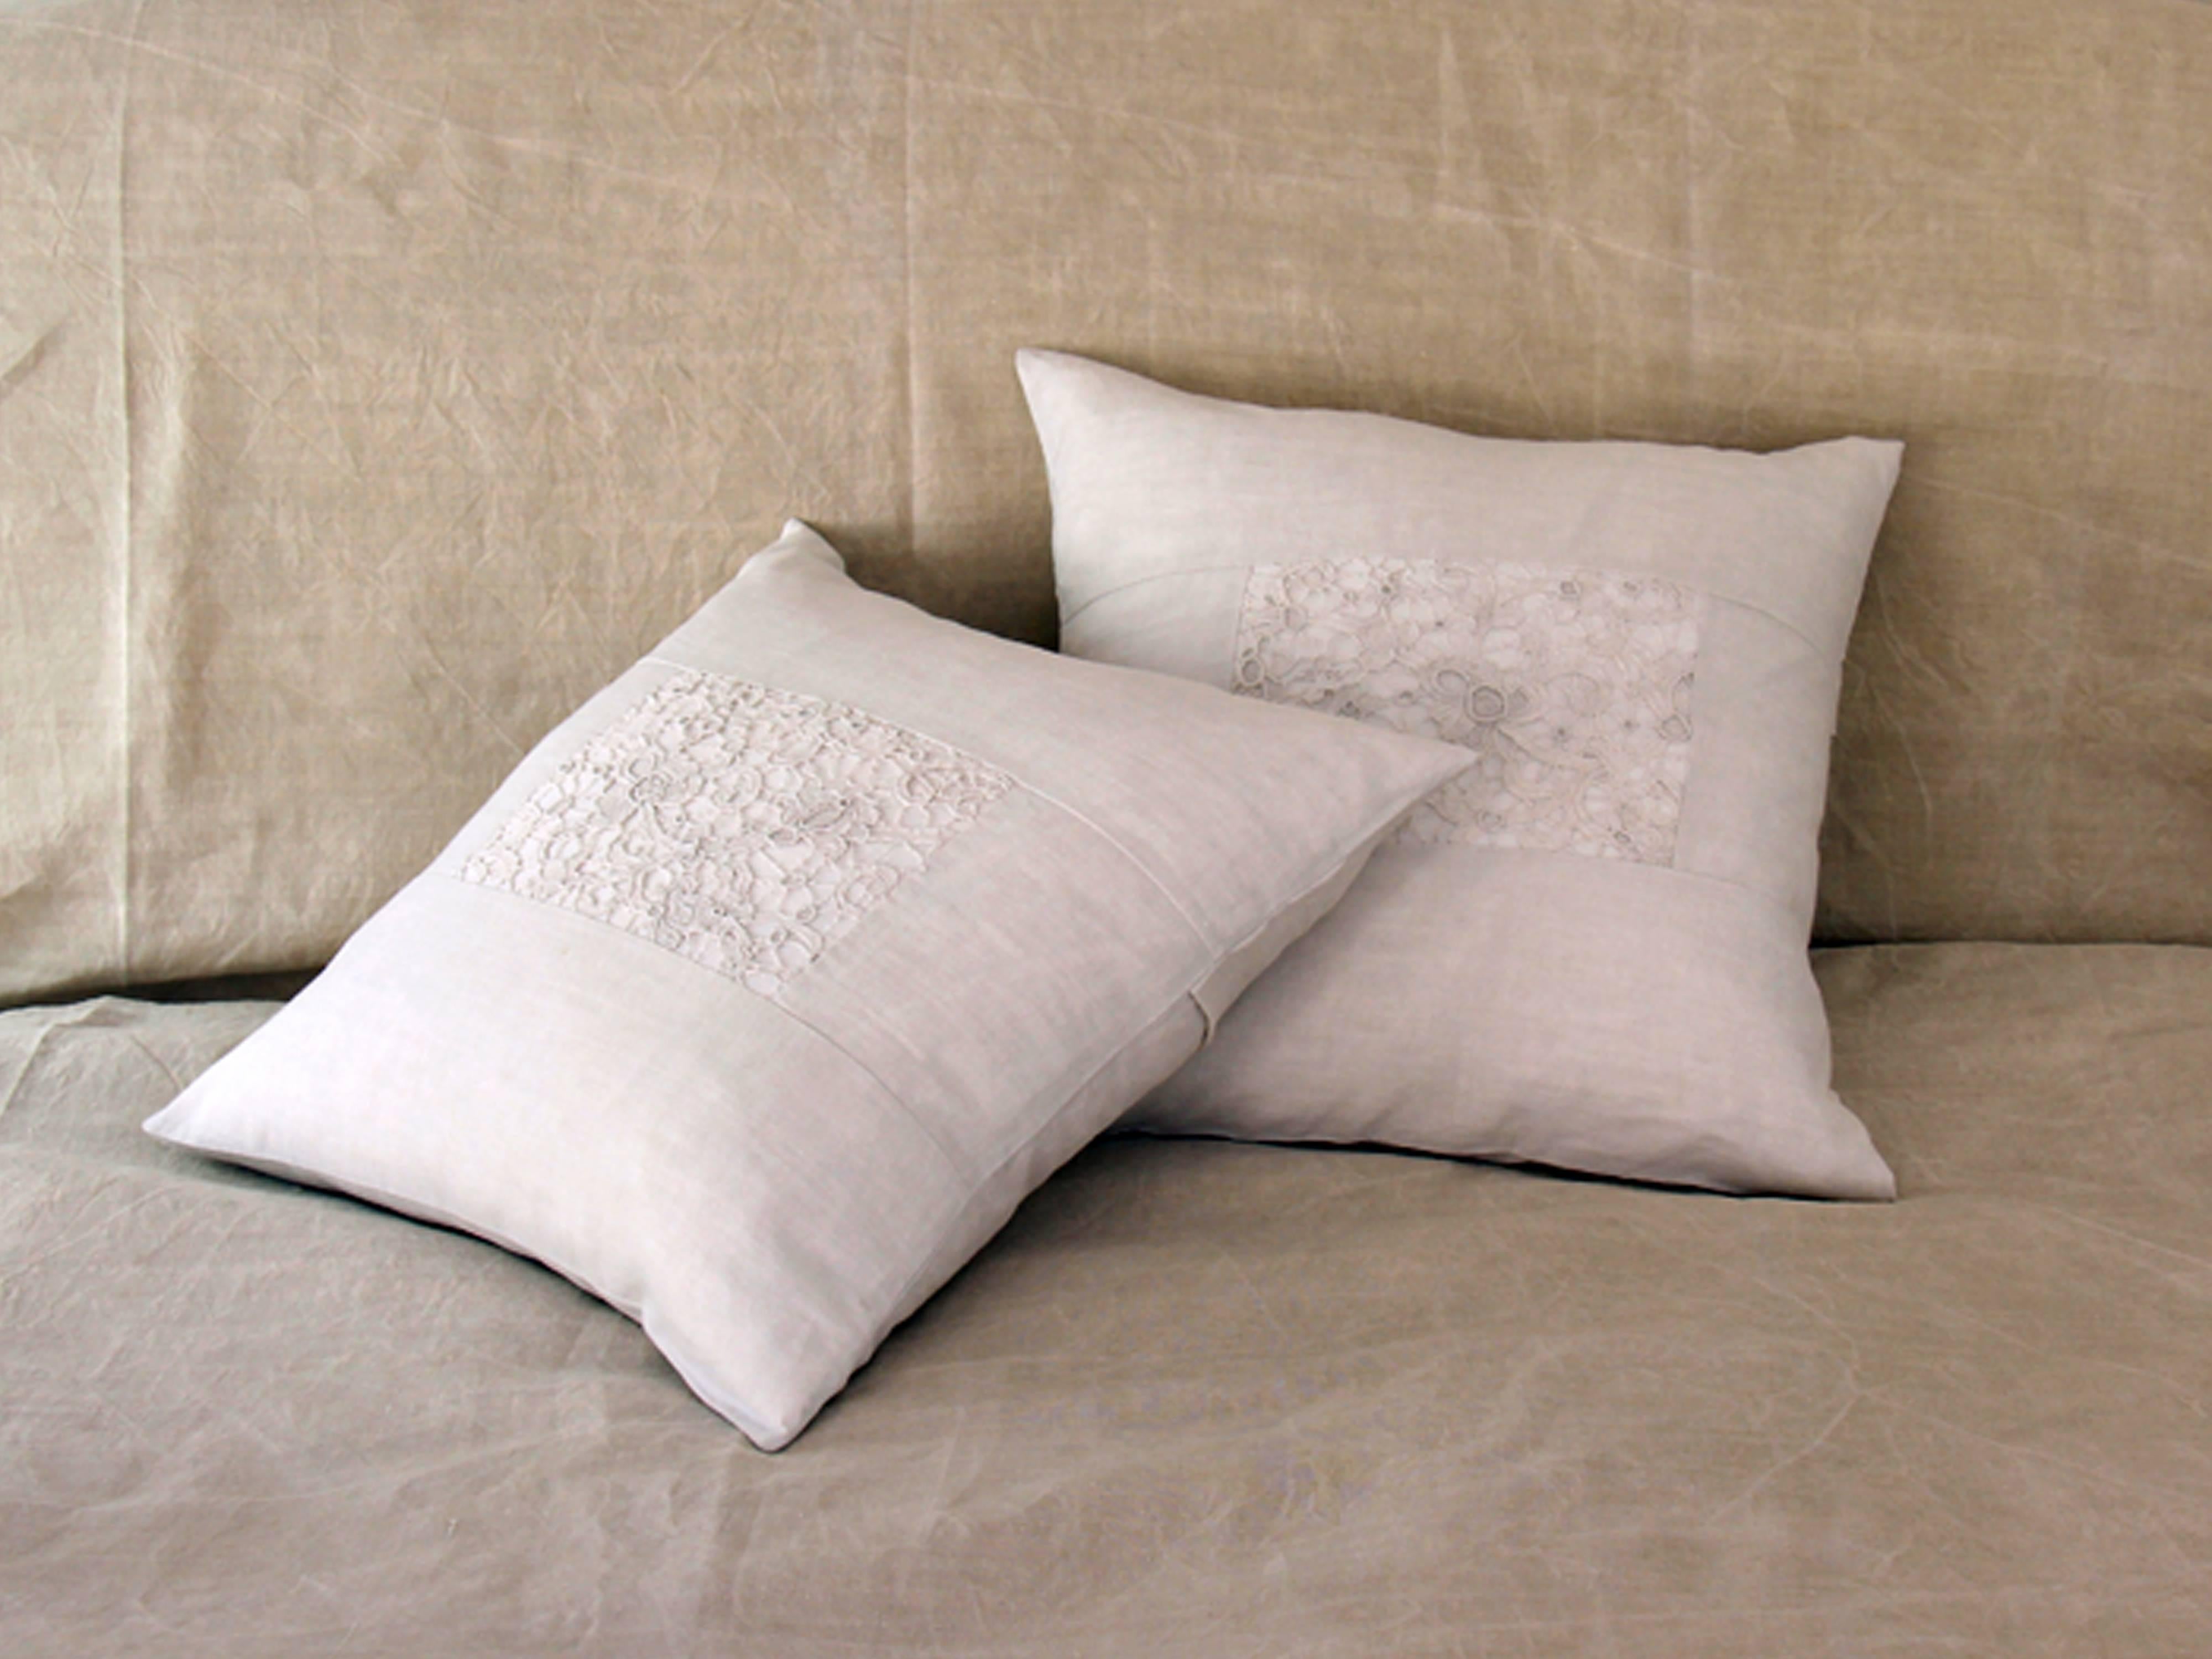 Charlotte Casadéjus collects unique and exceptional antique lace, embroidery, monograms and linens and uses them to create these wonderful pillows, cushions and bolsters.
This lovely cushion uses antique French linen as it's base with a central